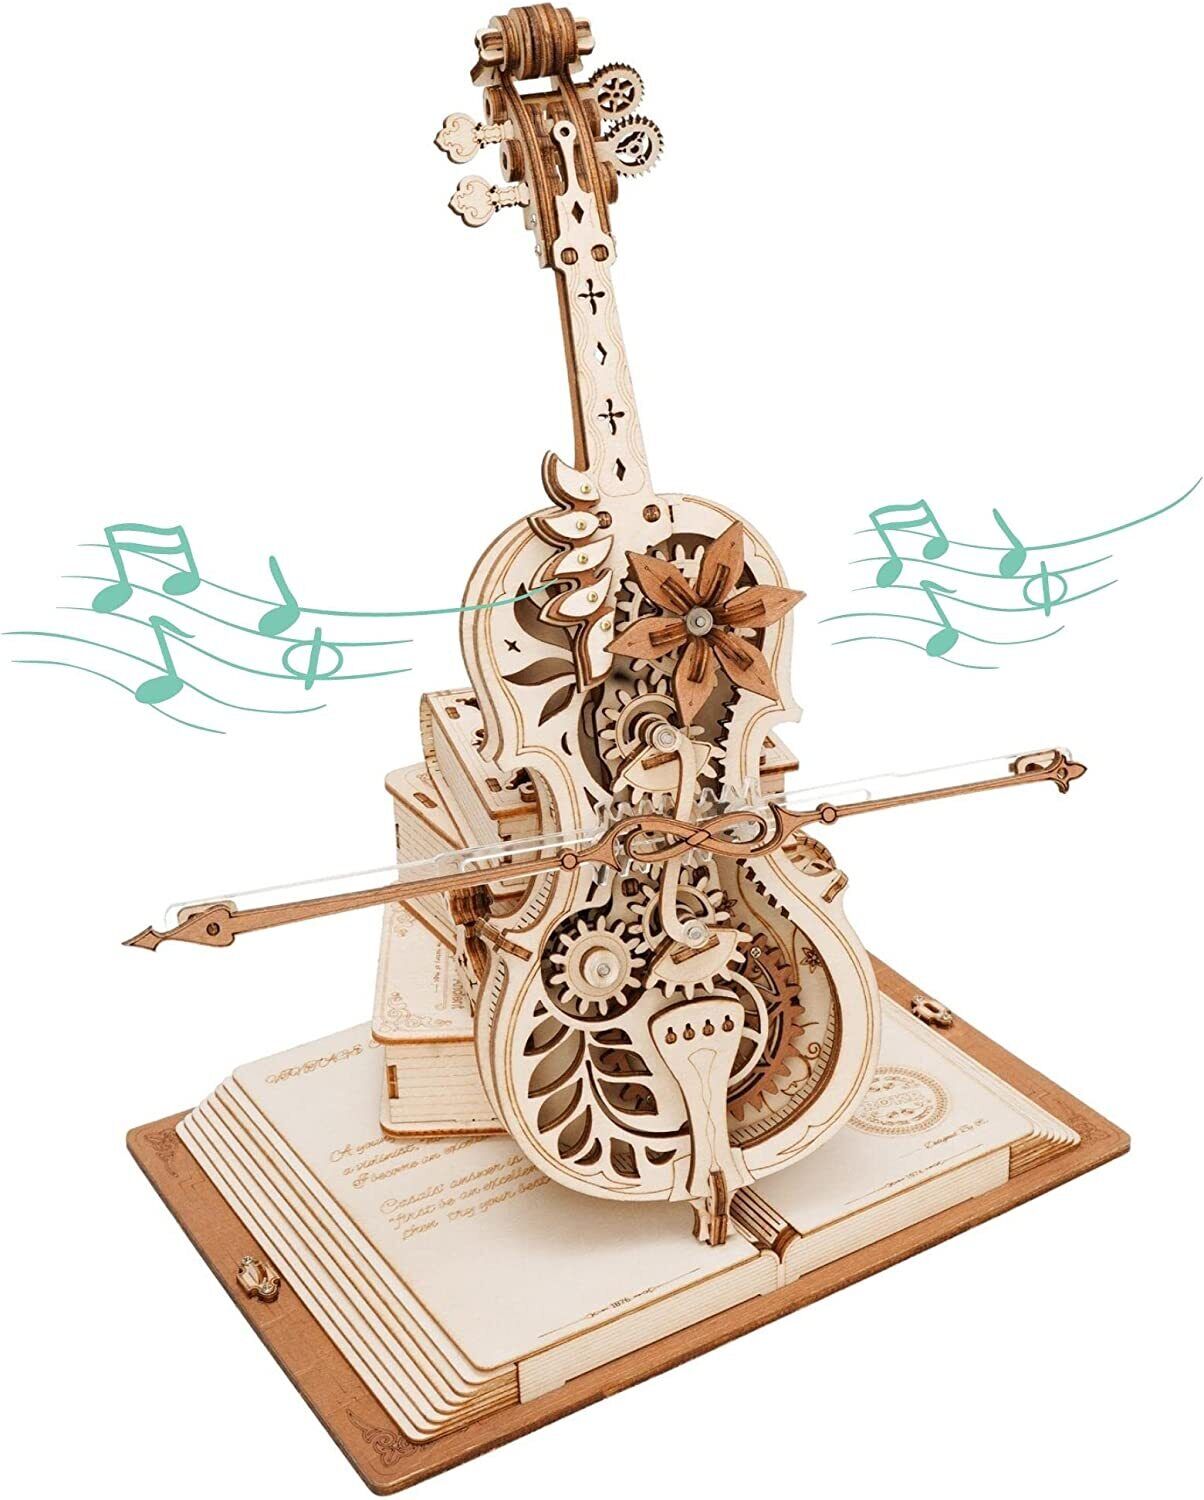 DIY Wooden Cello, Self Playing Musical Instrument, Magic Music Box, Cool Gift Ideas mysite